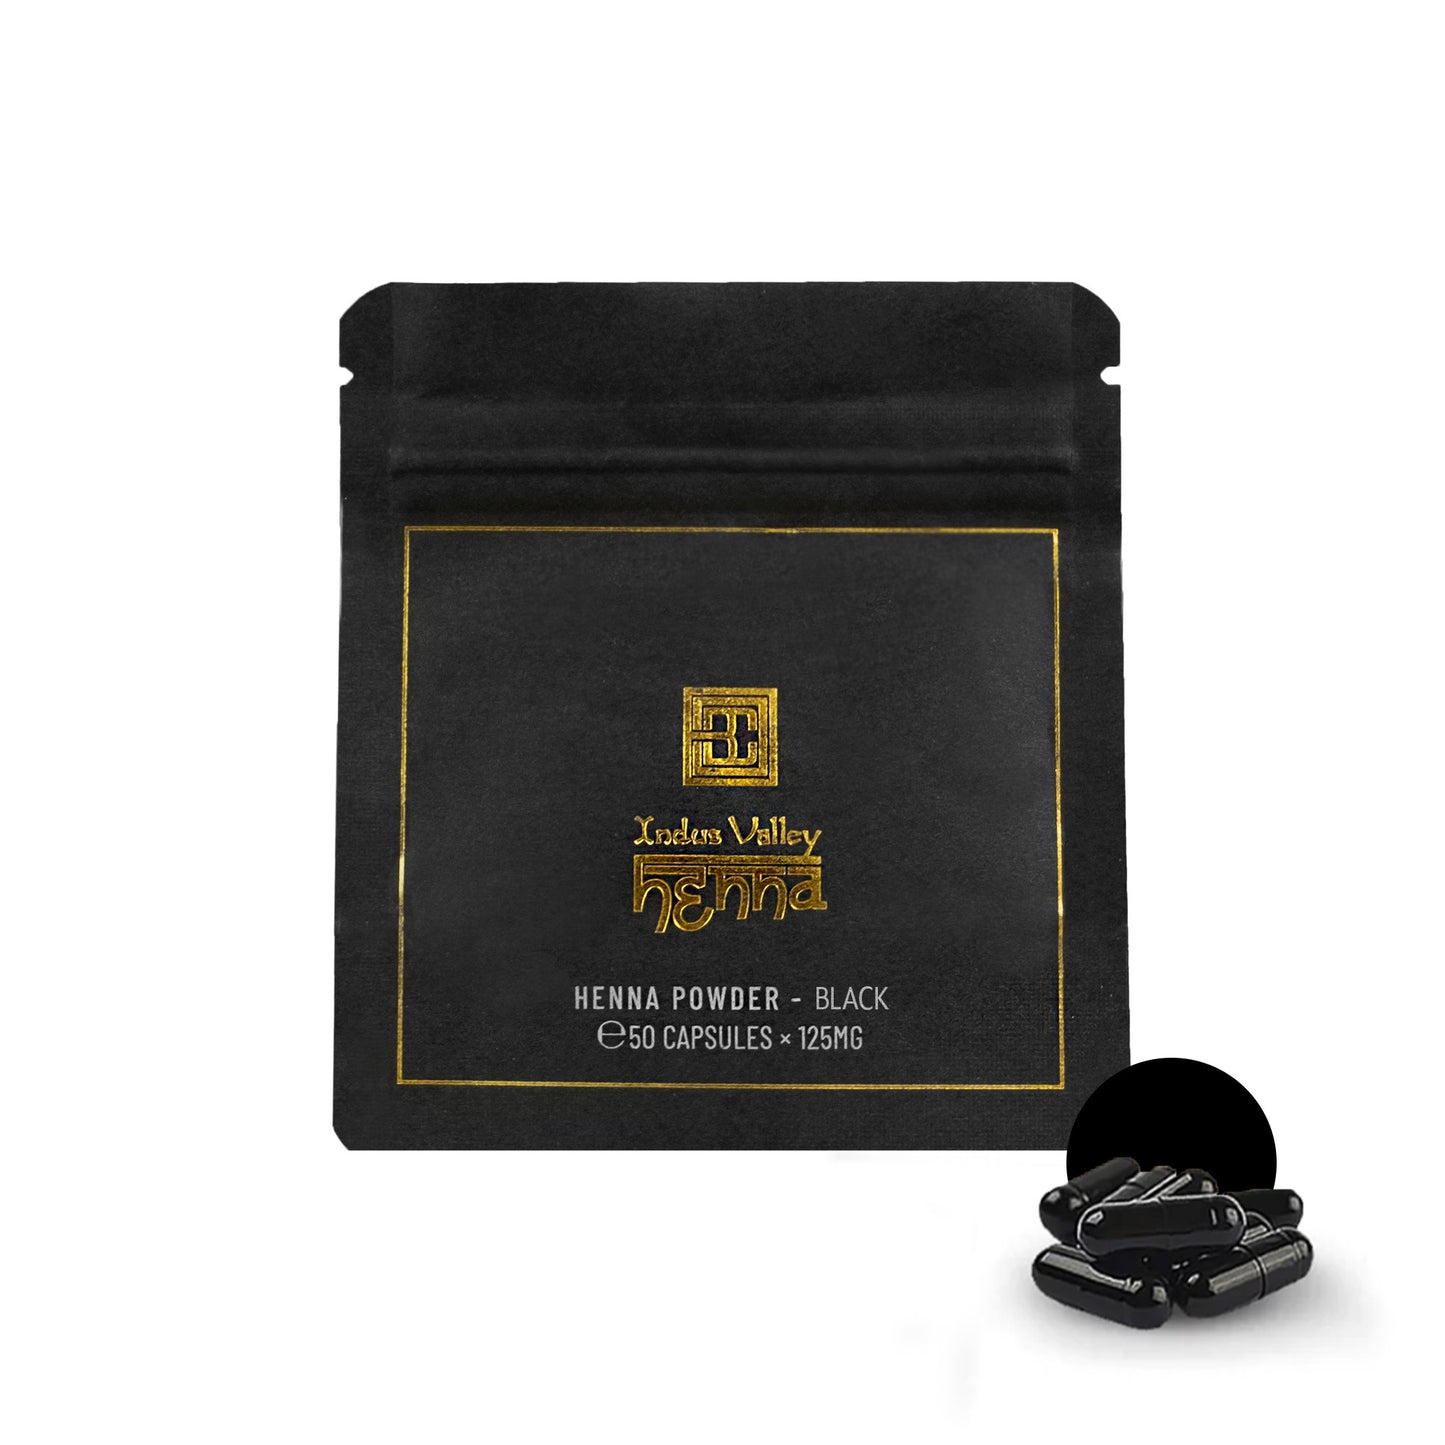 Brow Henna Powder capsules Color-Black alongside packaging against a white background